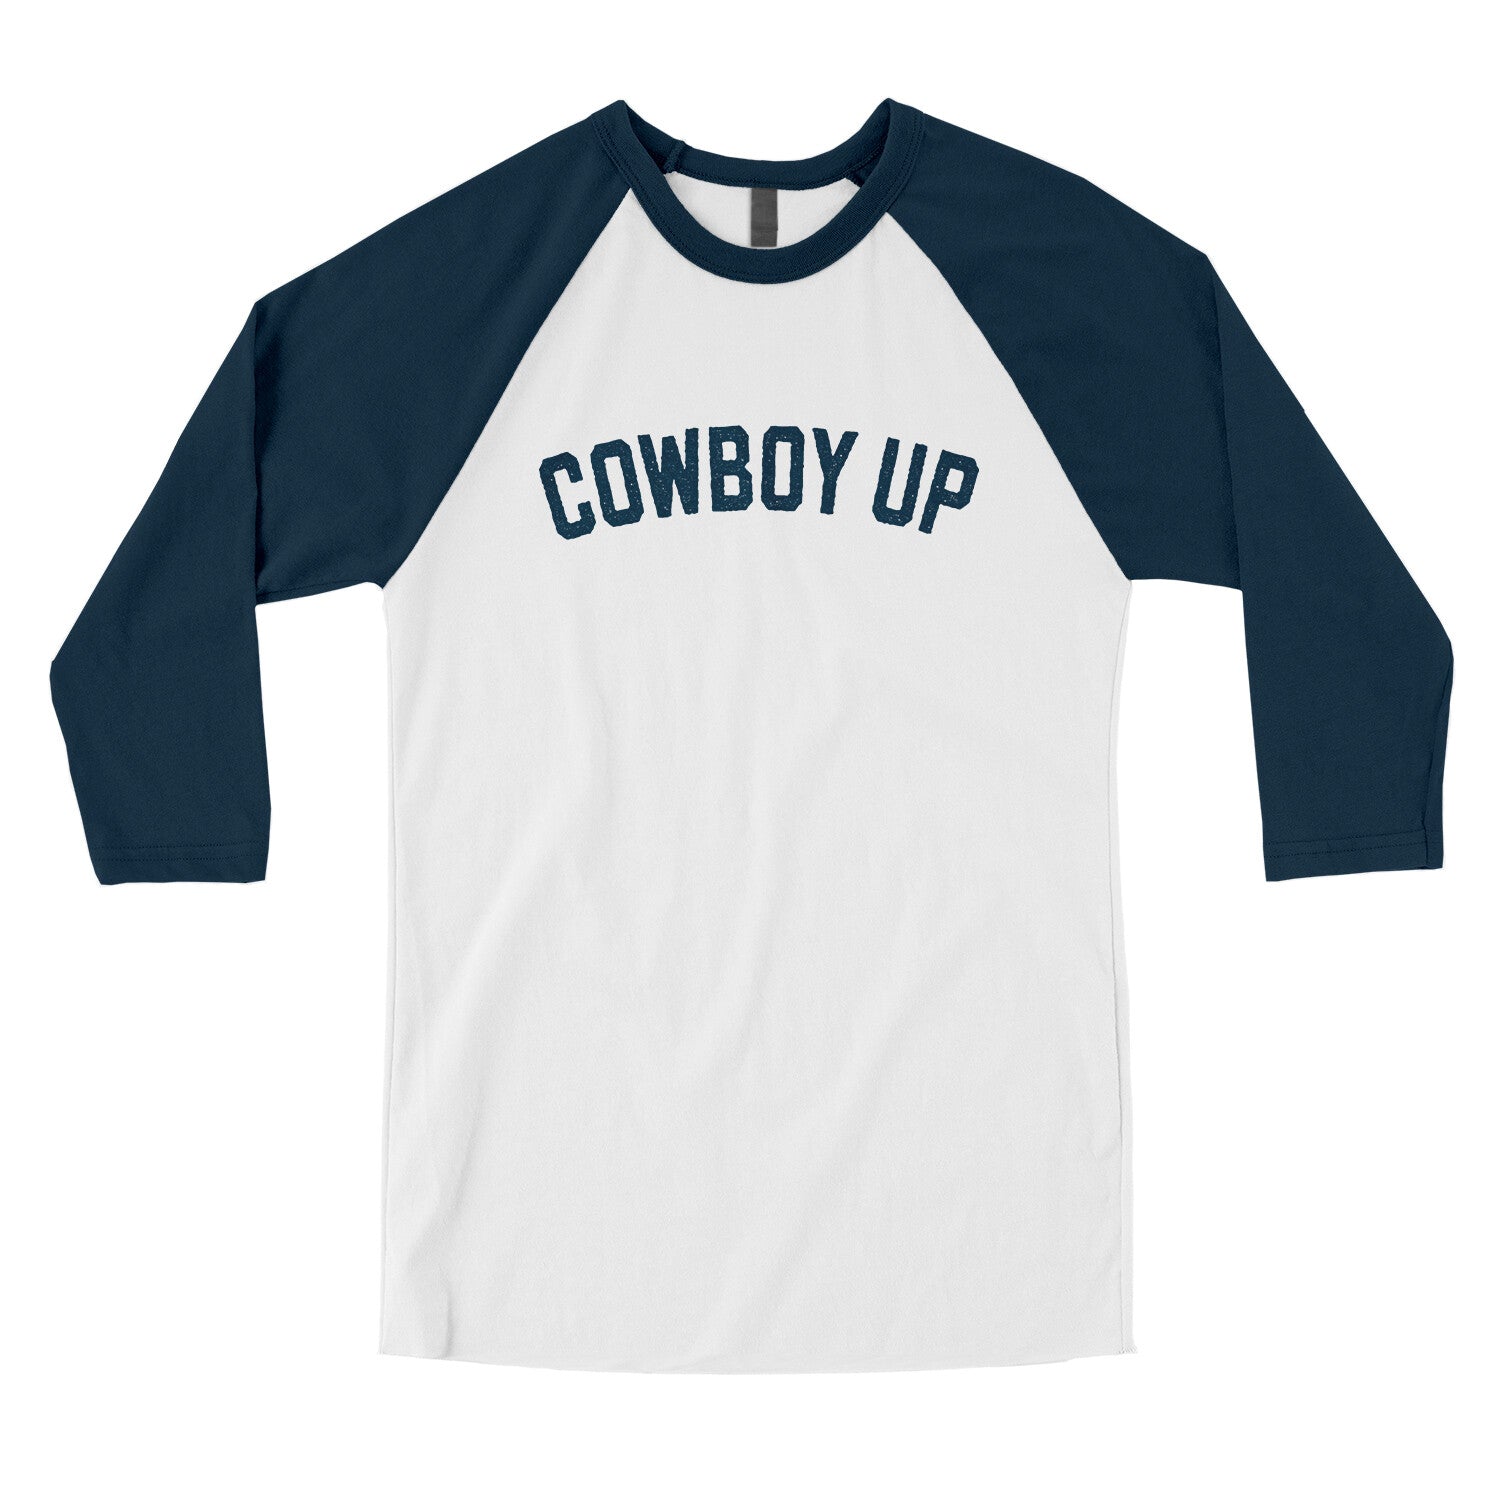 Cowboy Up in White with Navy Color